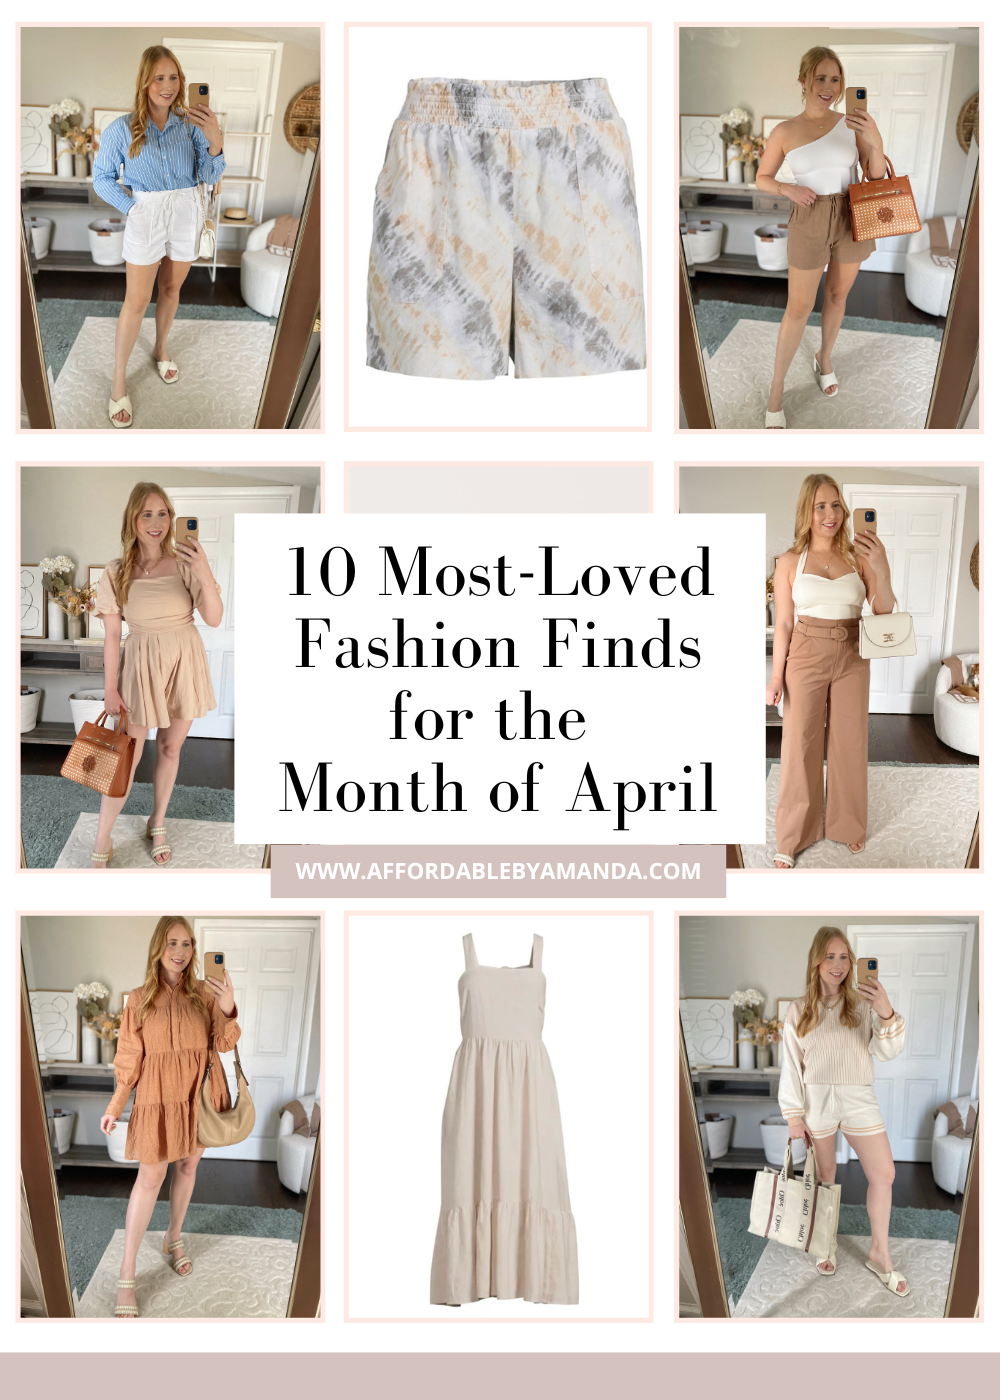 10 Most-Loved Fashion Finds for the Month of April